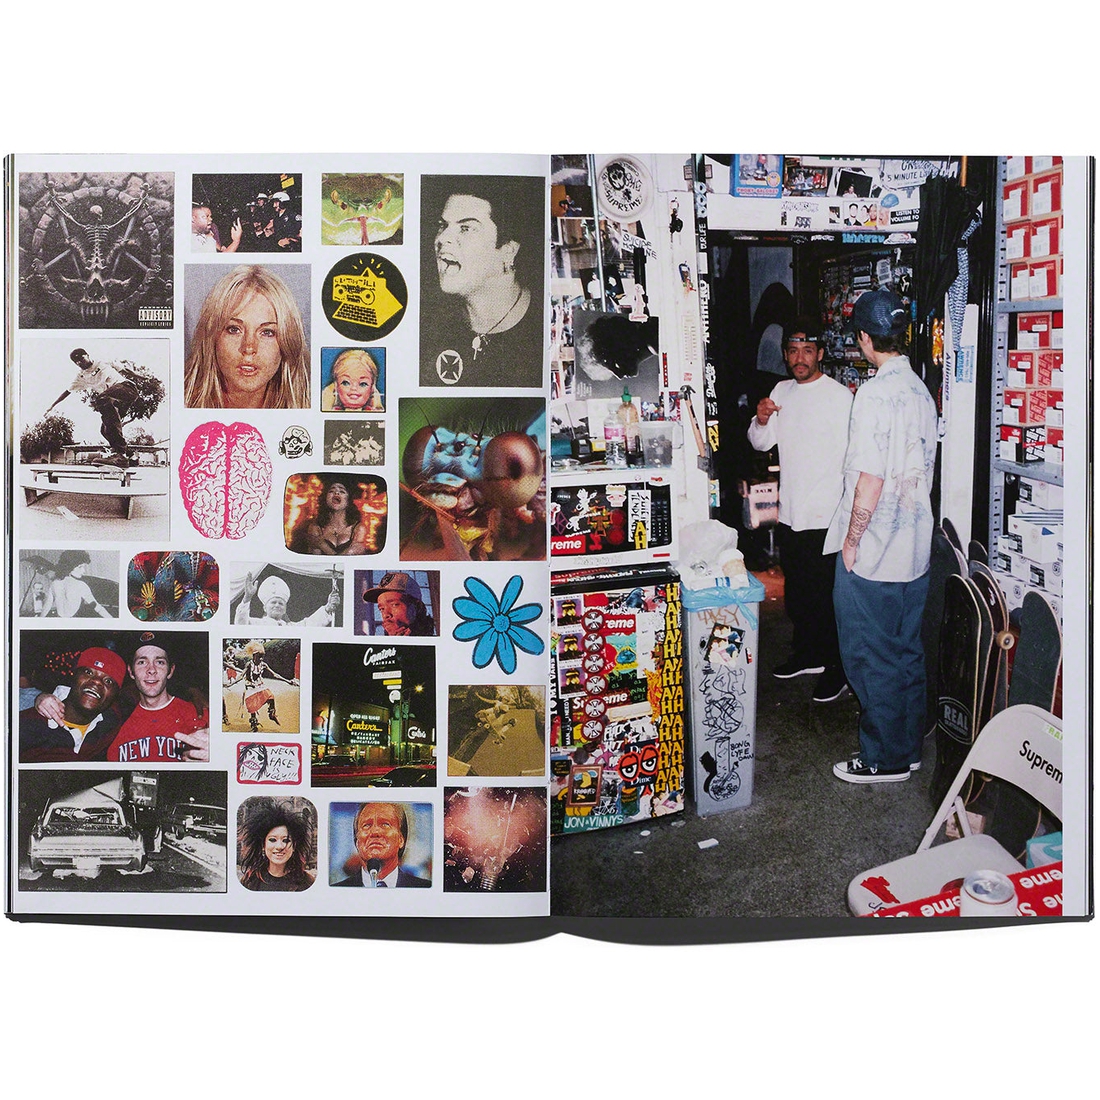 Details on Supreme Fairfax Book Multicolor from spring summer
                                                    2023 (Price is $30)